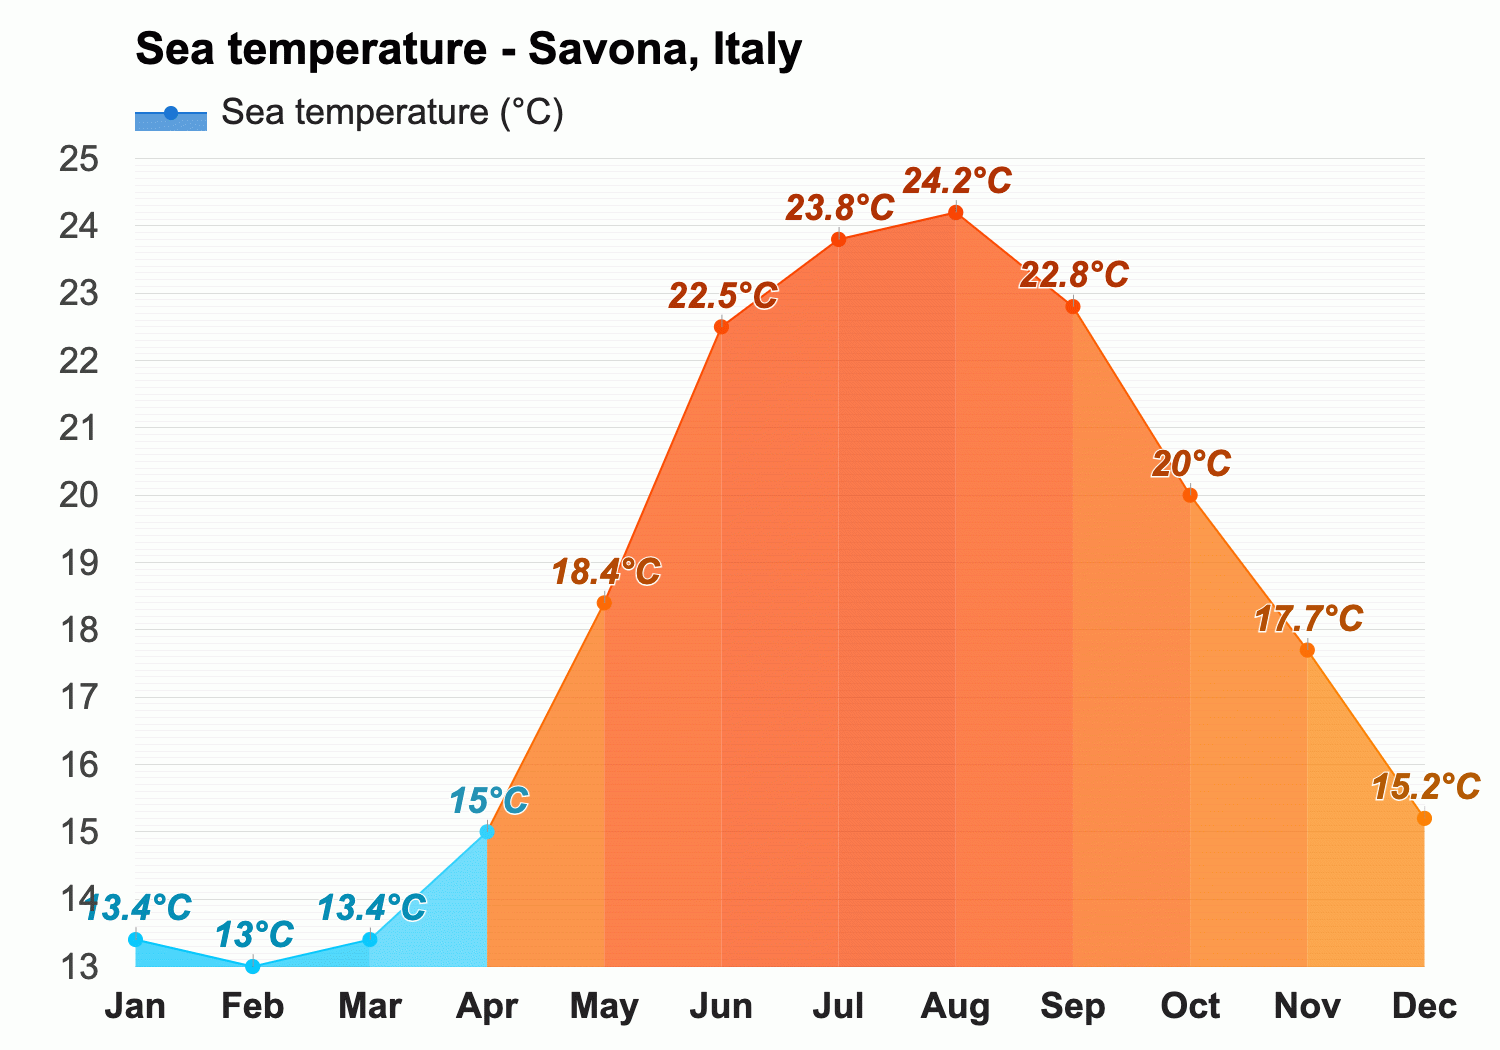 Savona, Italy - Climate & Monthly weather forecast